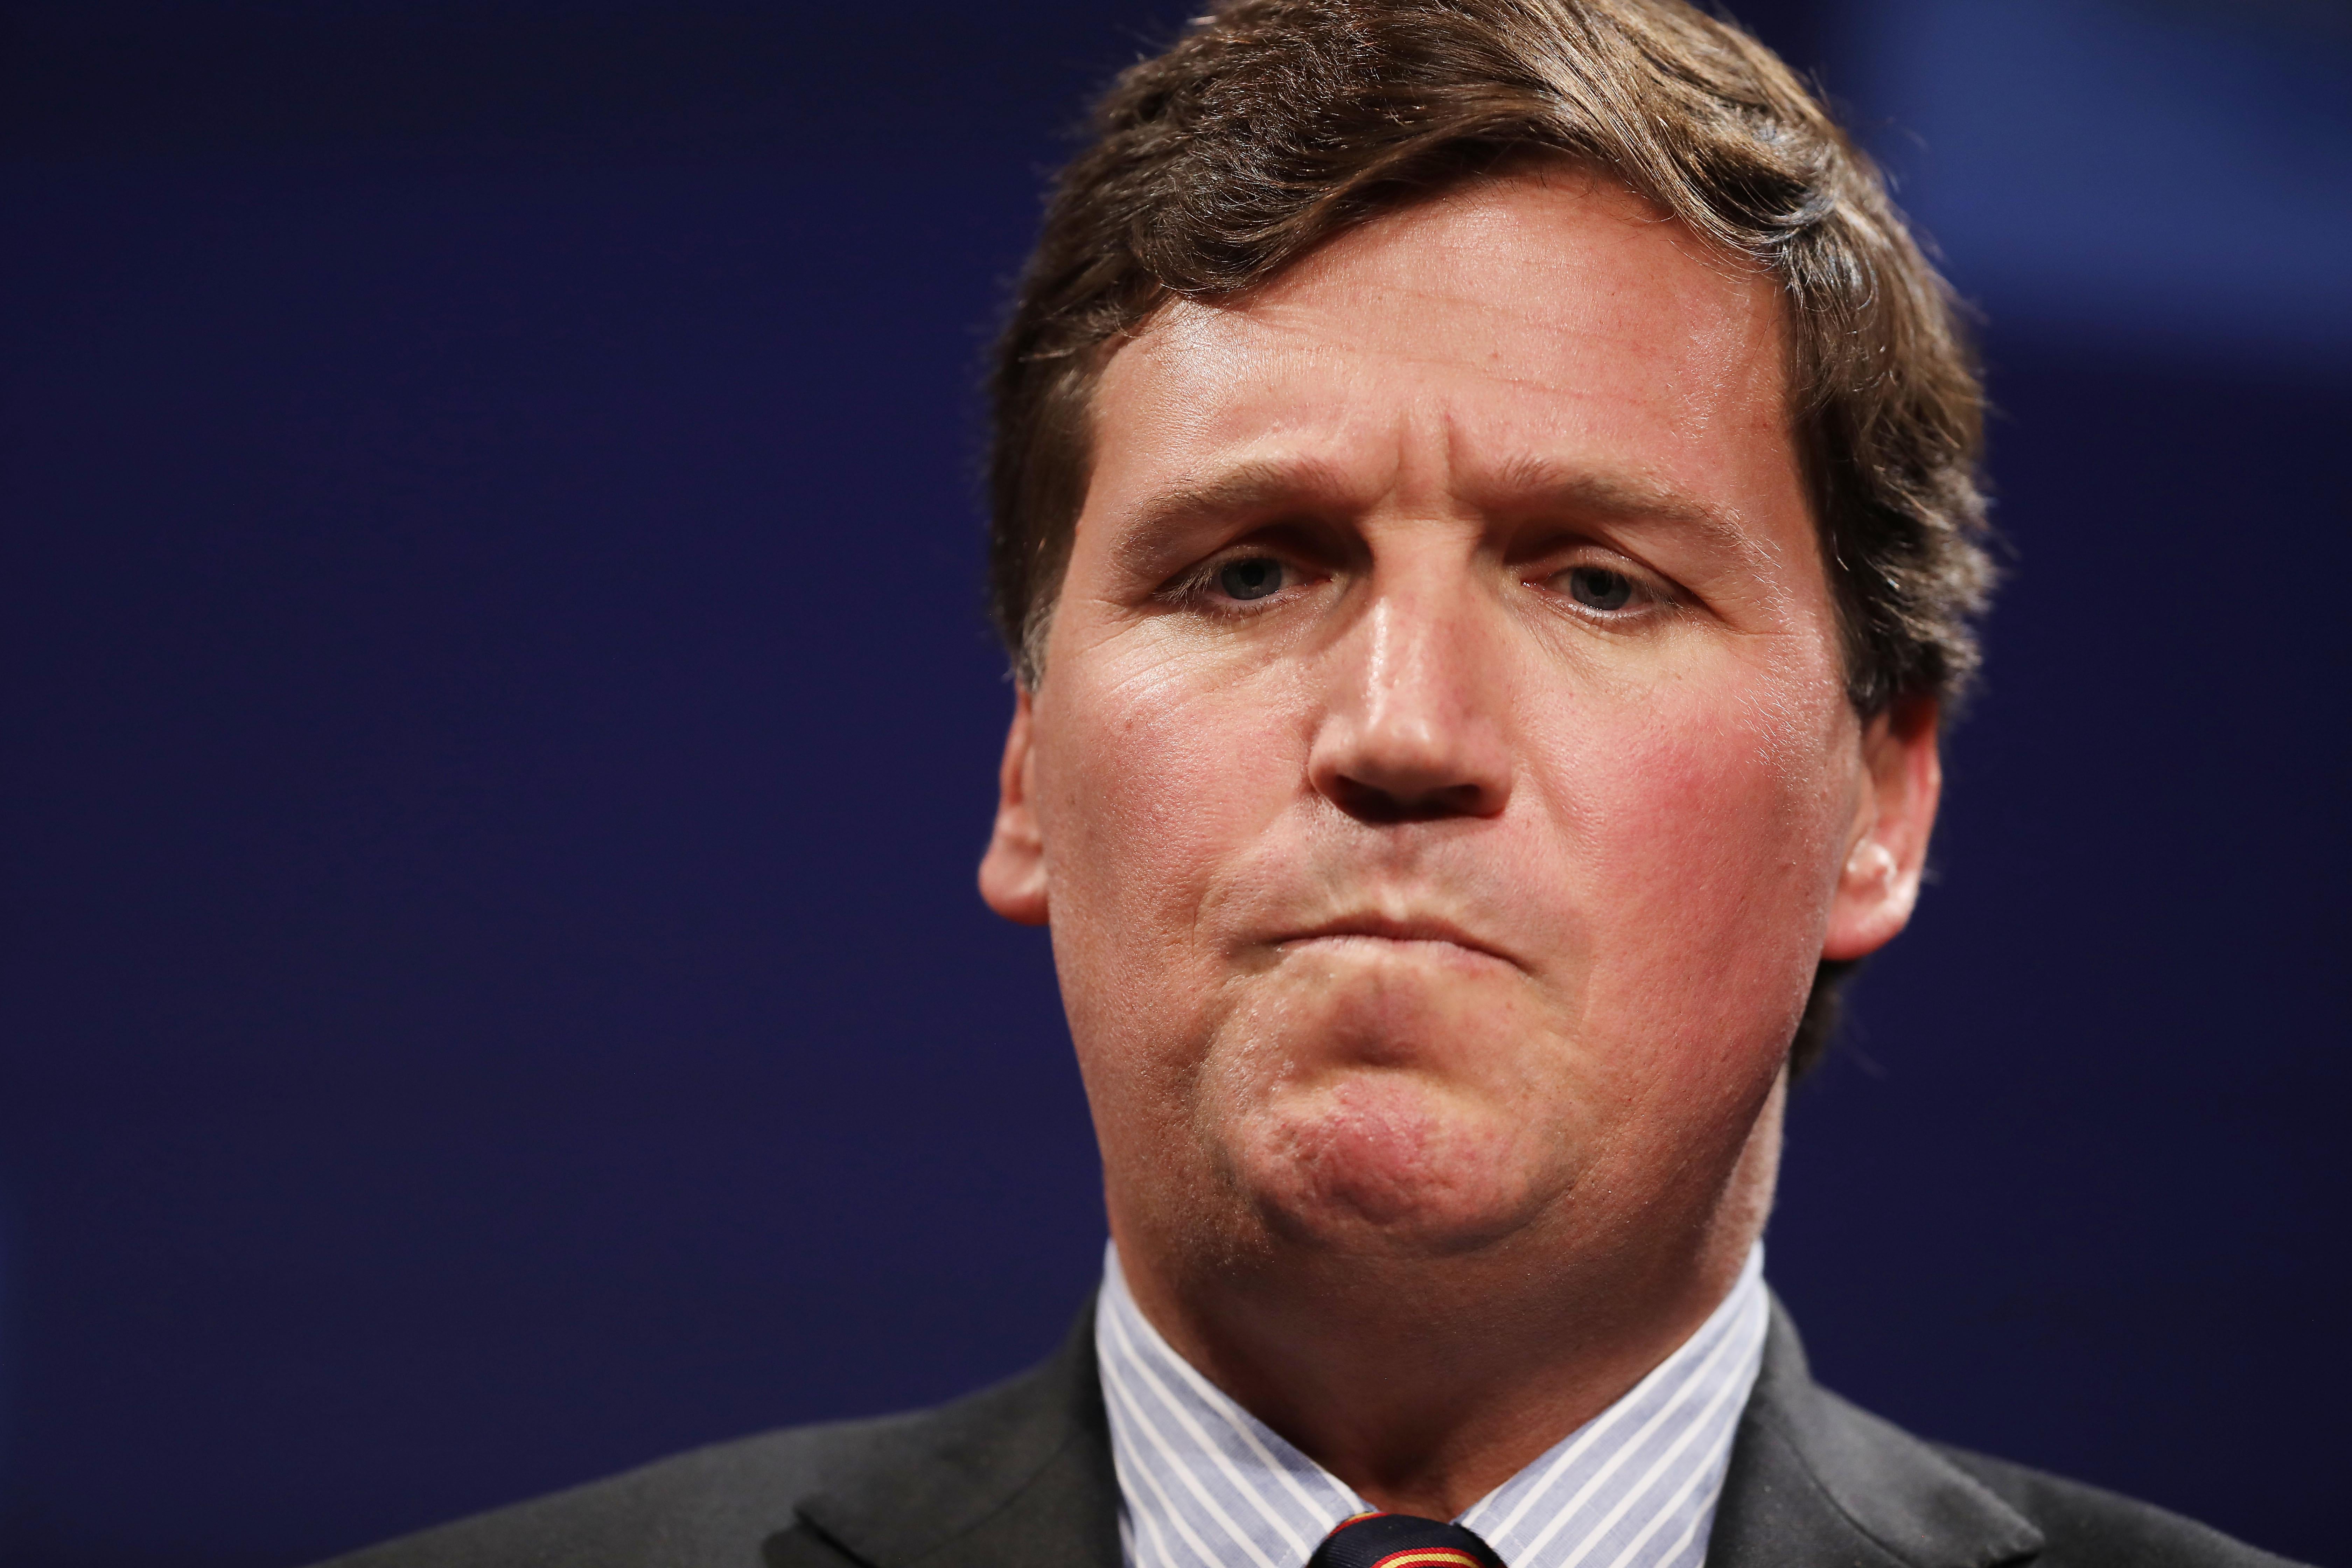 A close-up of Tucker Carlson's face frowning.